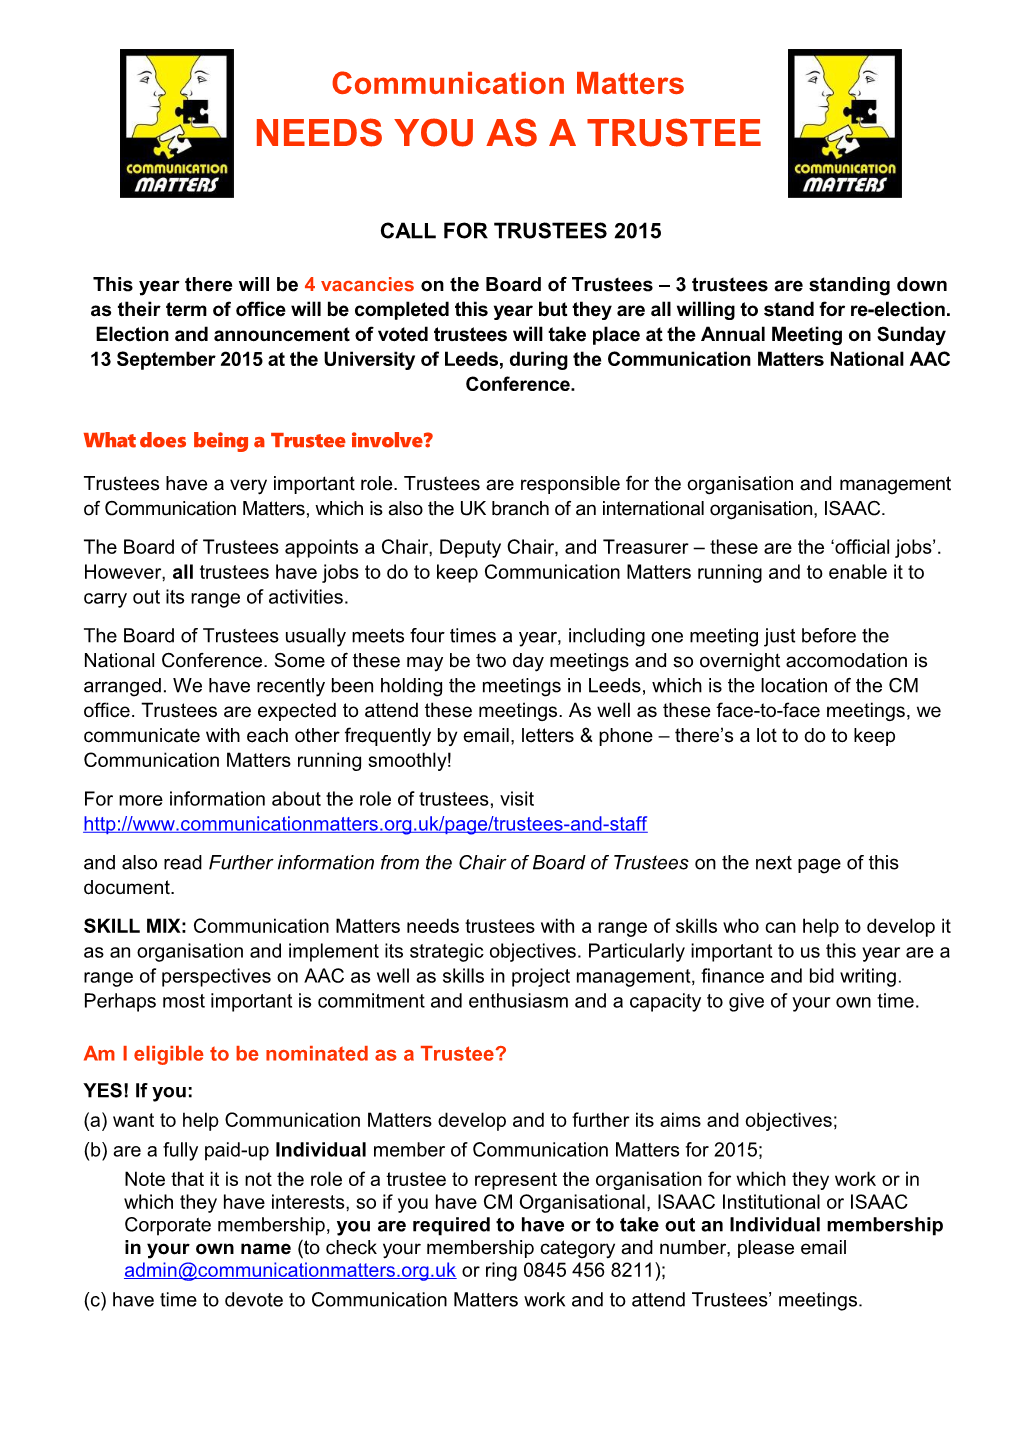 Call for Trustees 2015